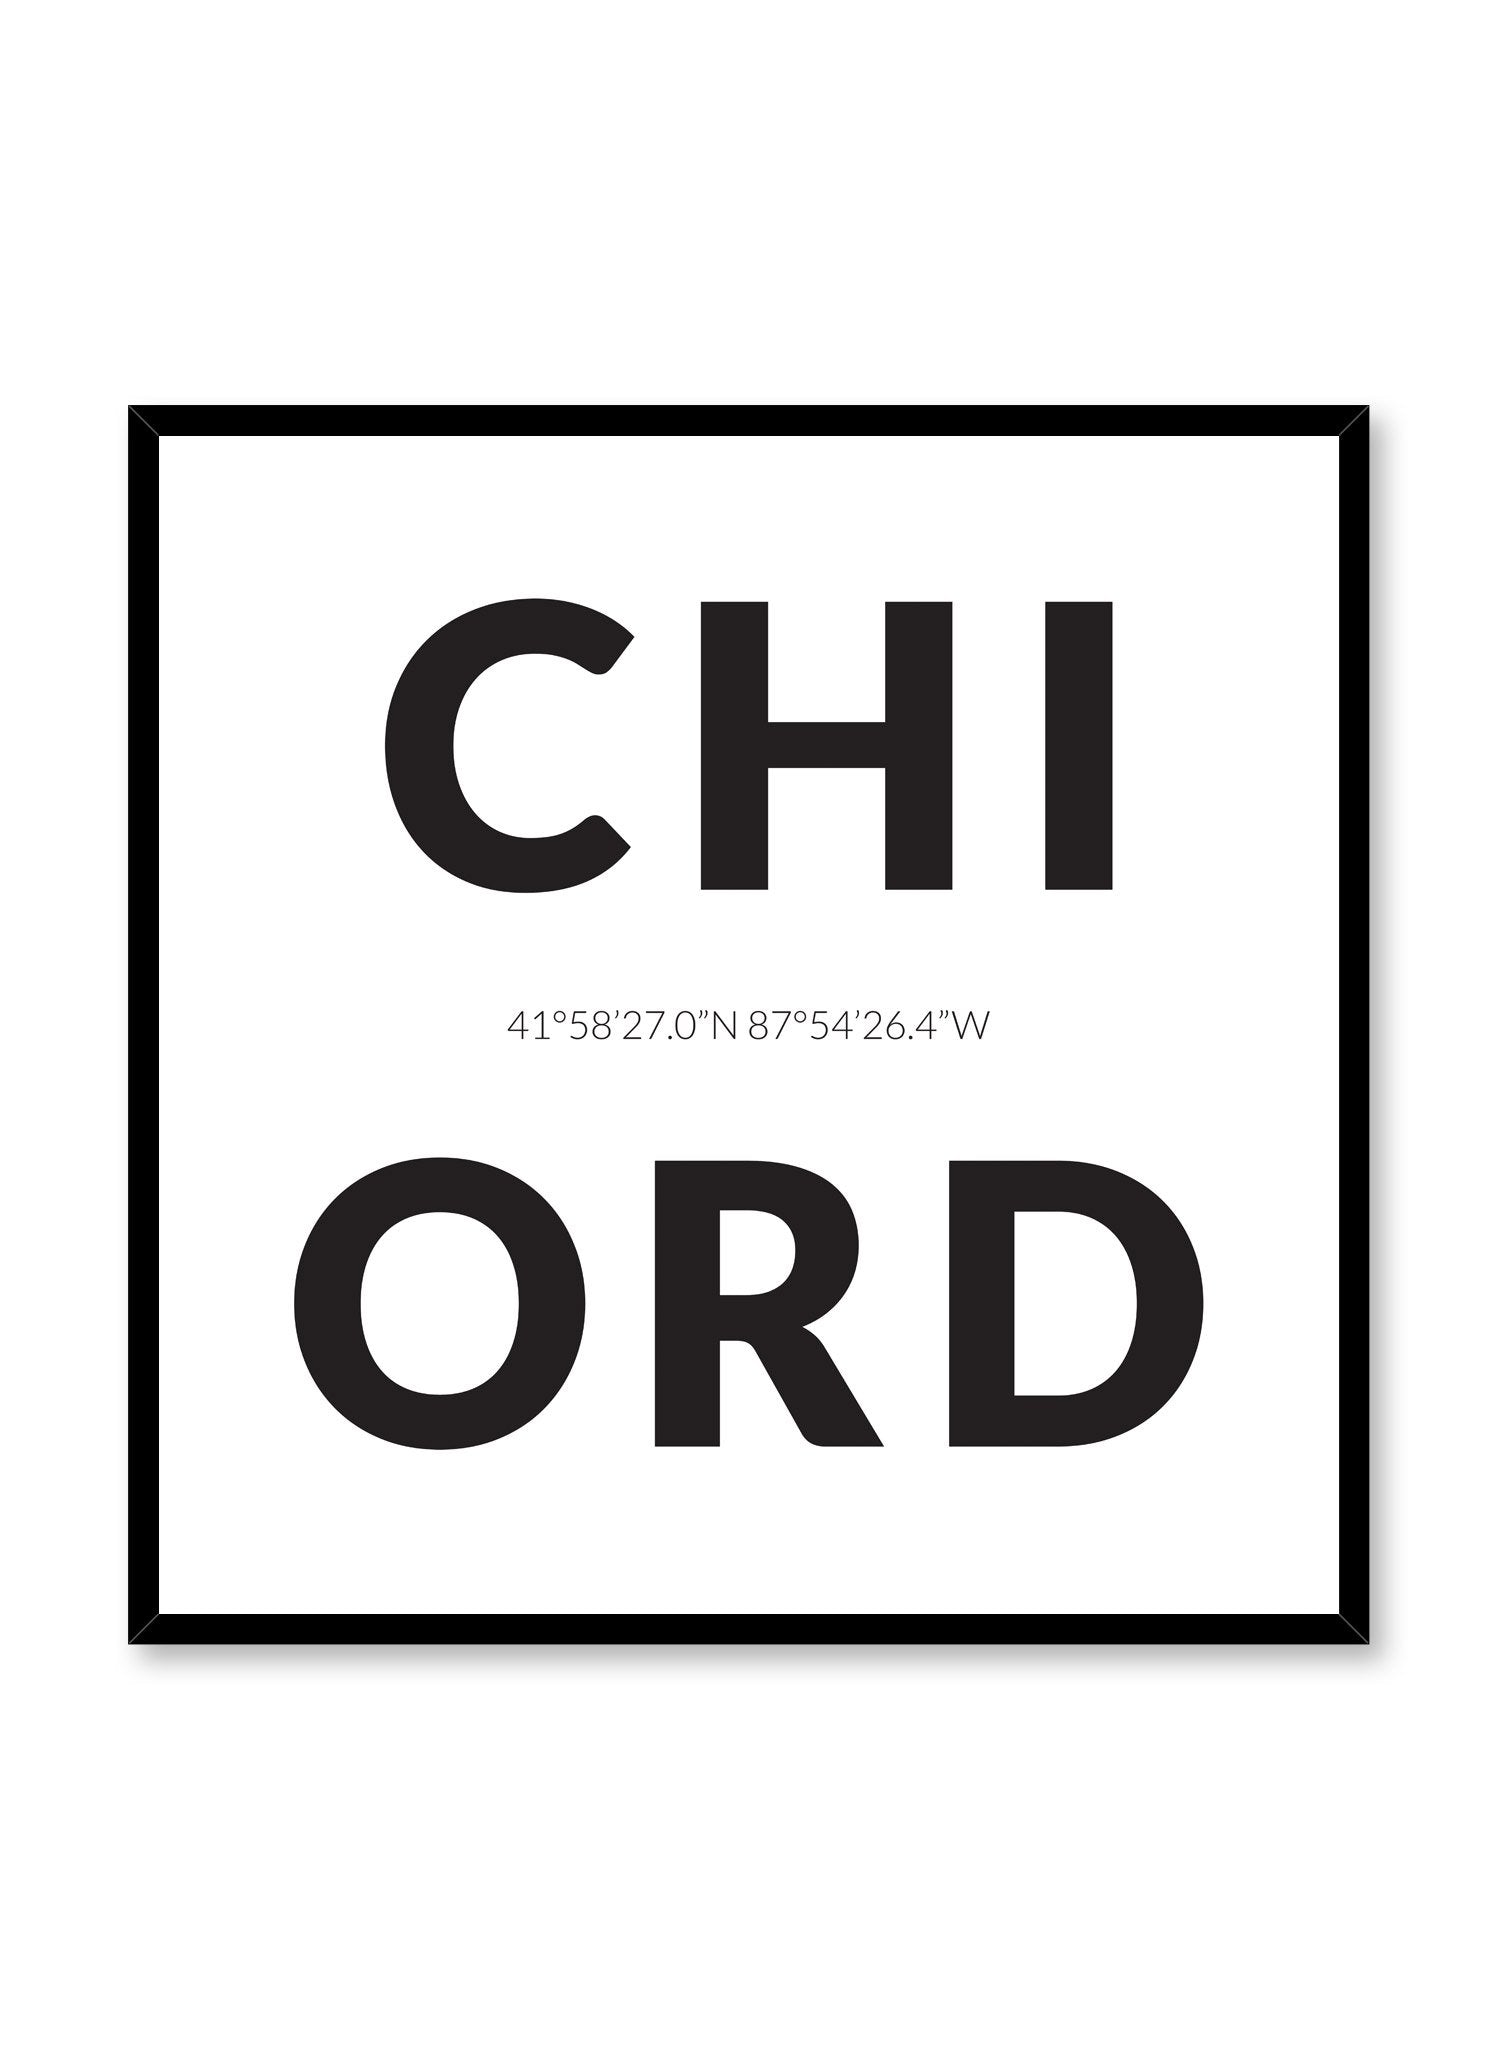 Minimalist design poster by Opposite Wall with airport code Chicago ORD